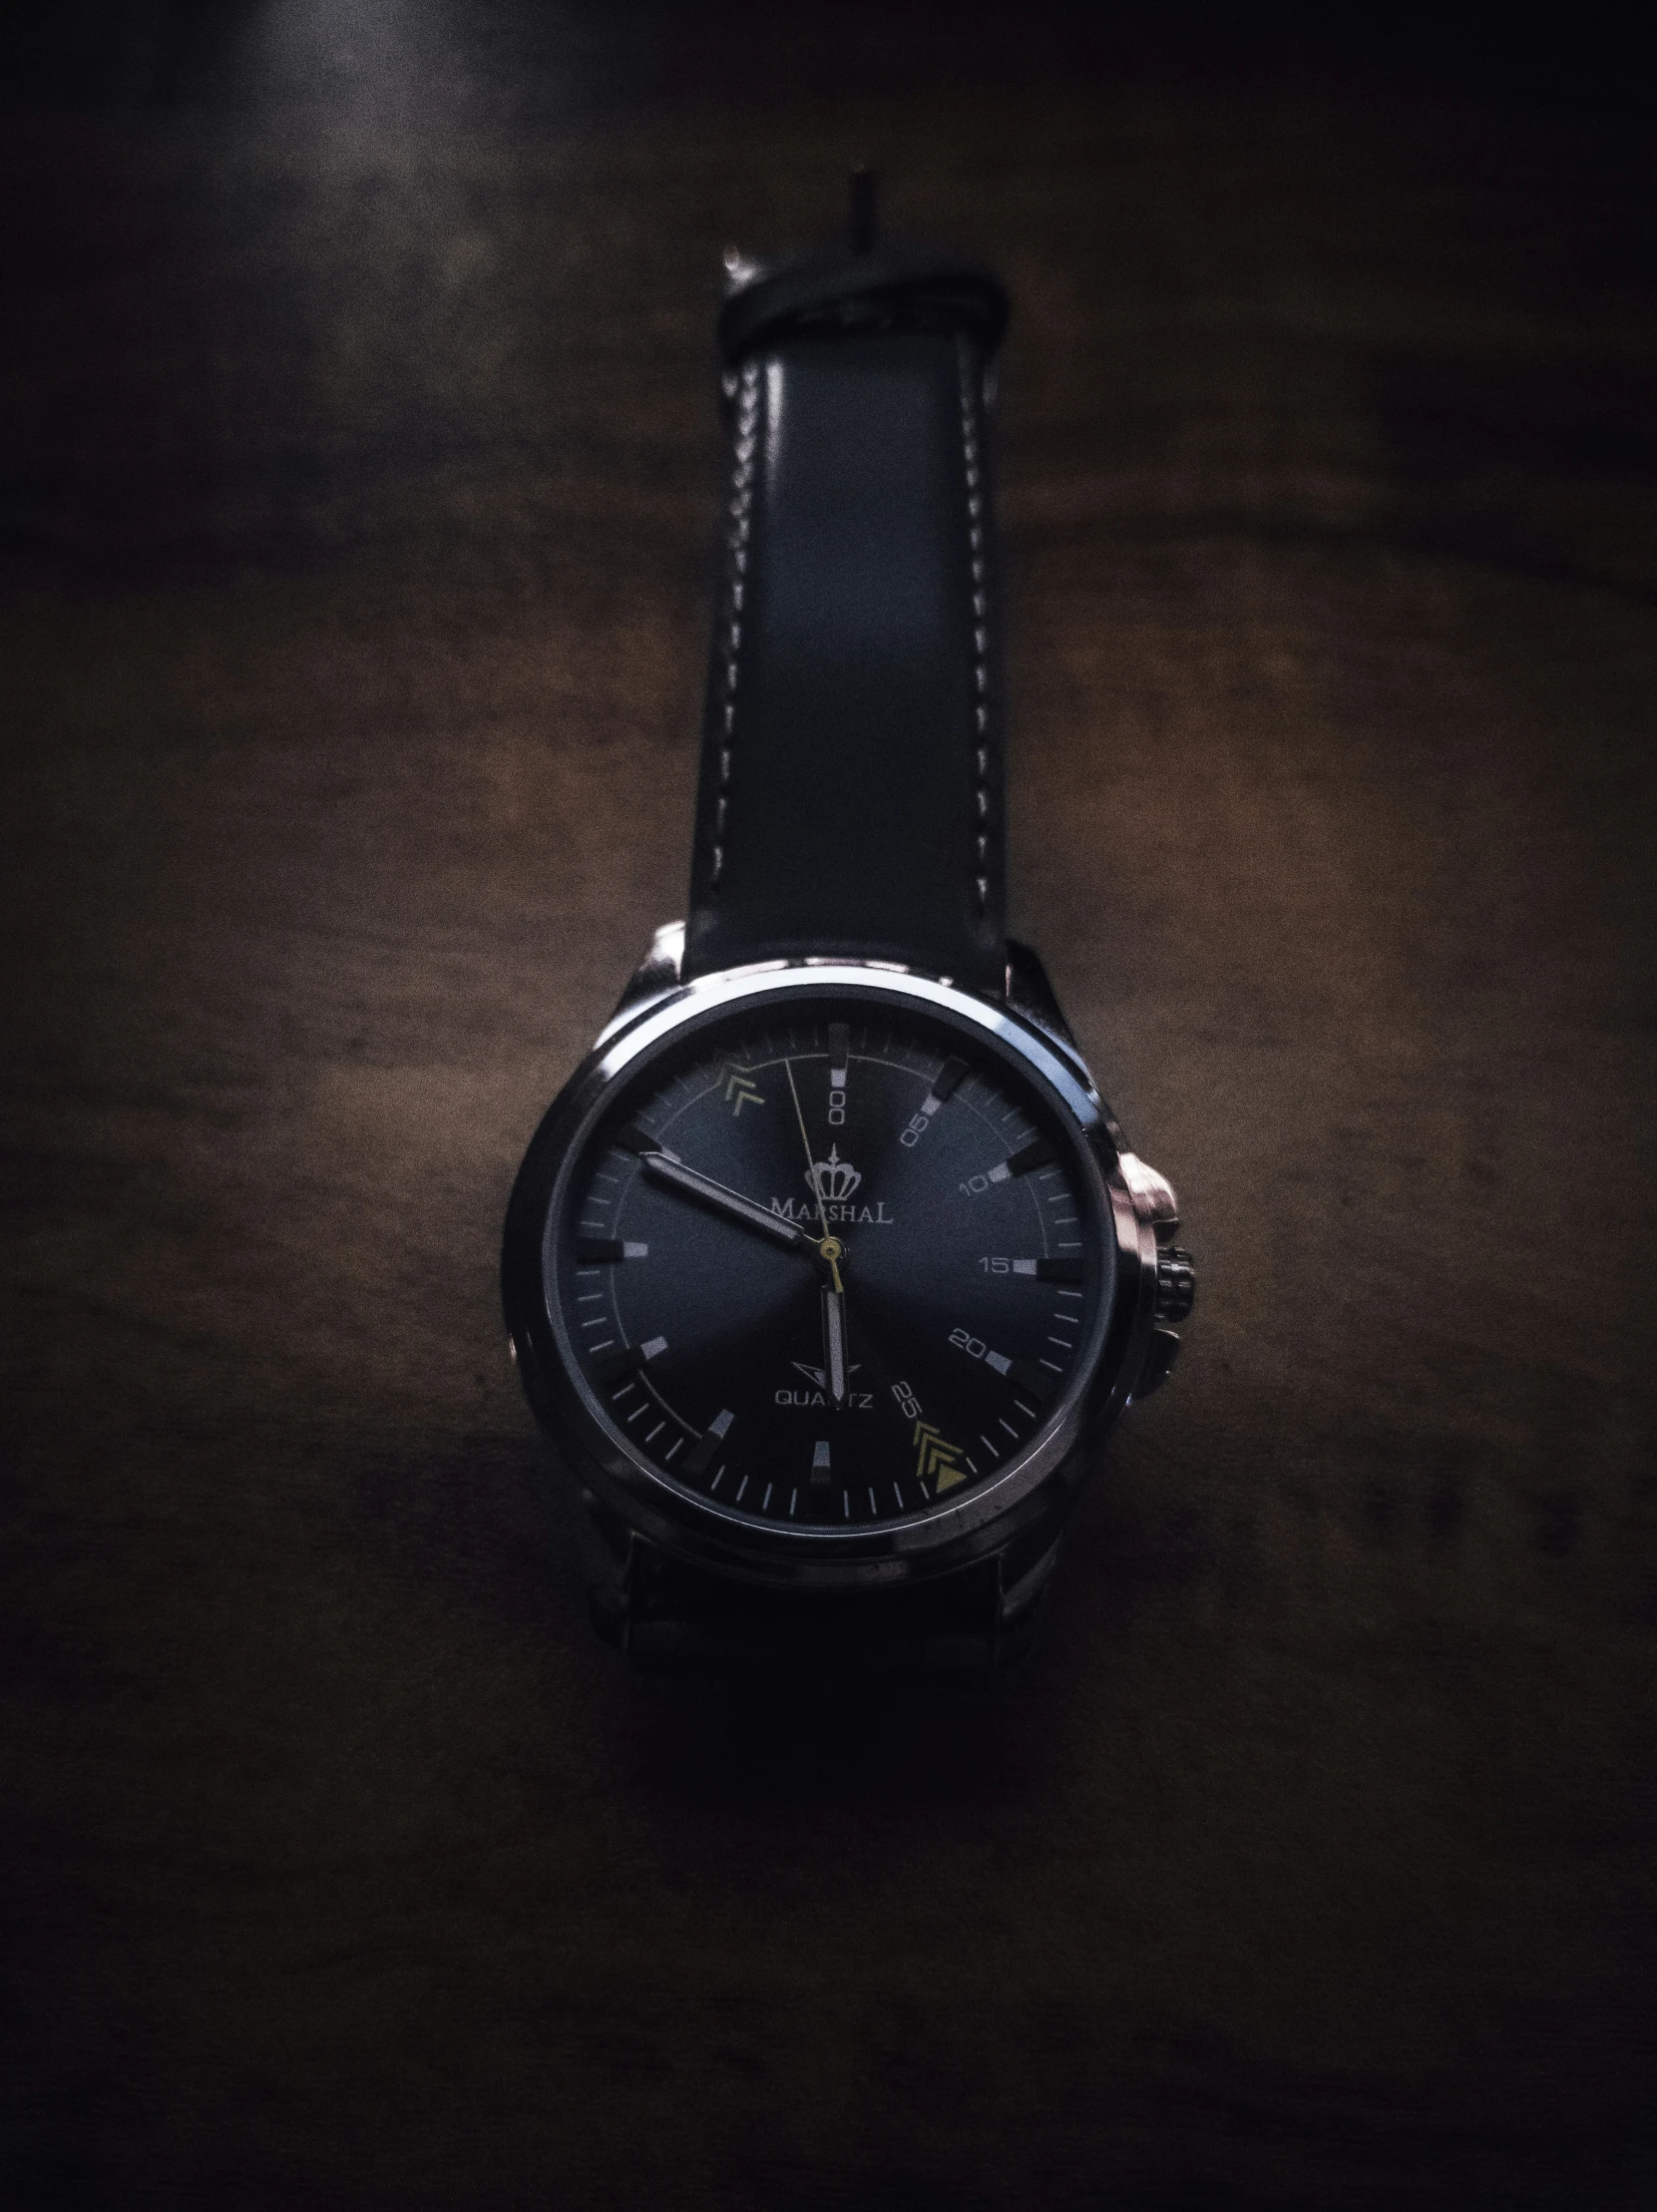 a watch is shown in the dark with a leather strap